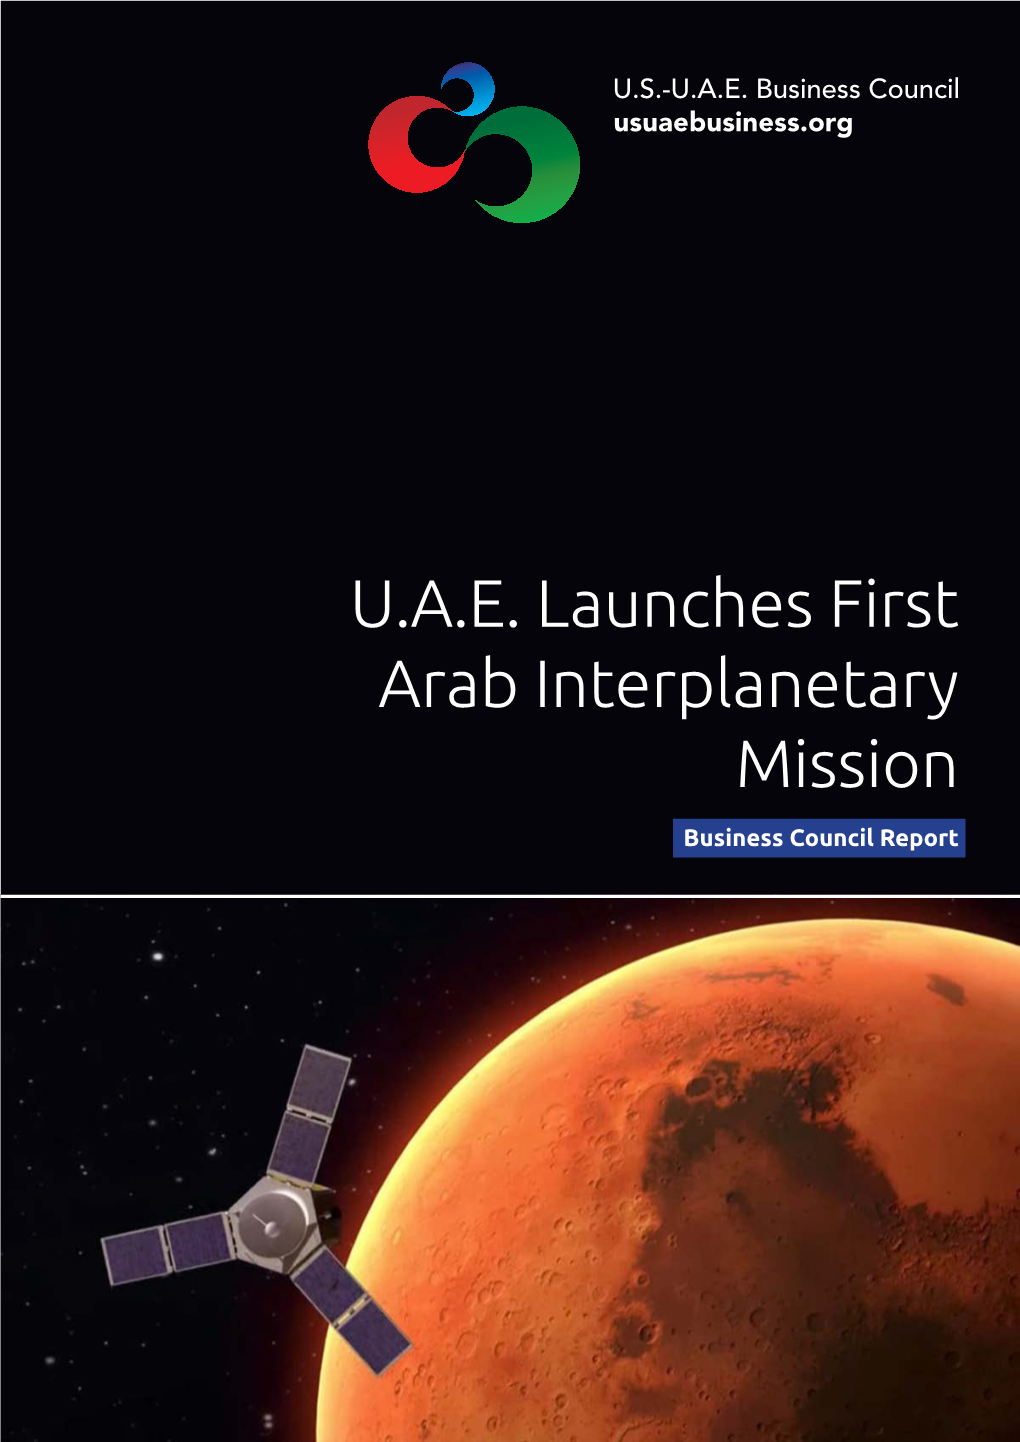 U.A.E. Launches First Arab Interplanetary Mission